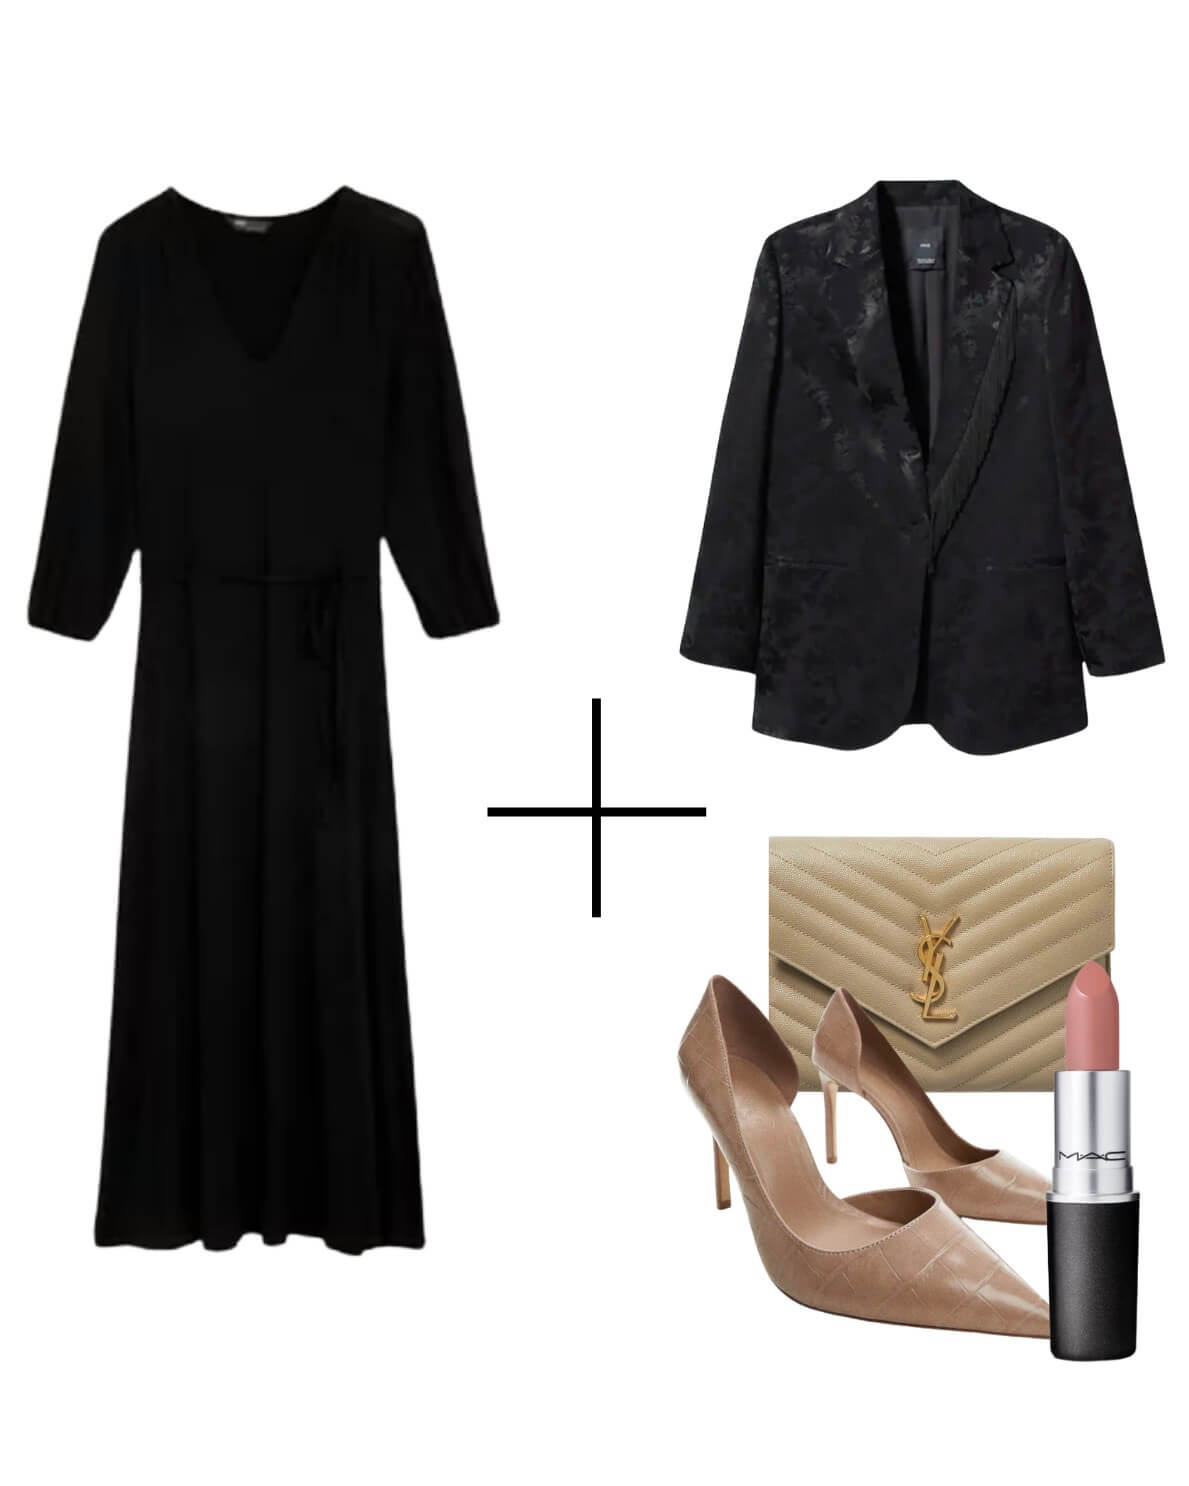 Style a Black Midi Dress for 5 Events in Winter